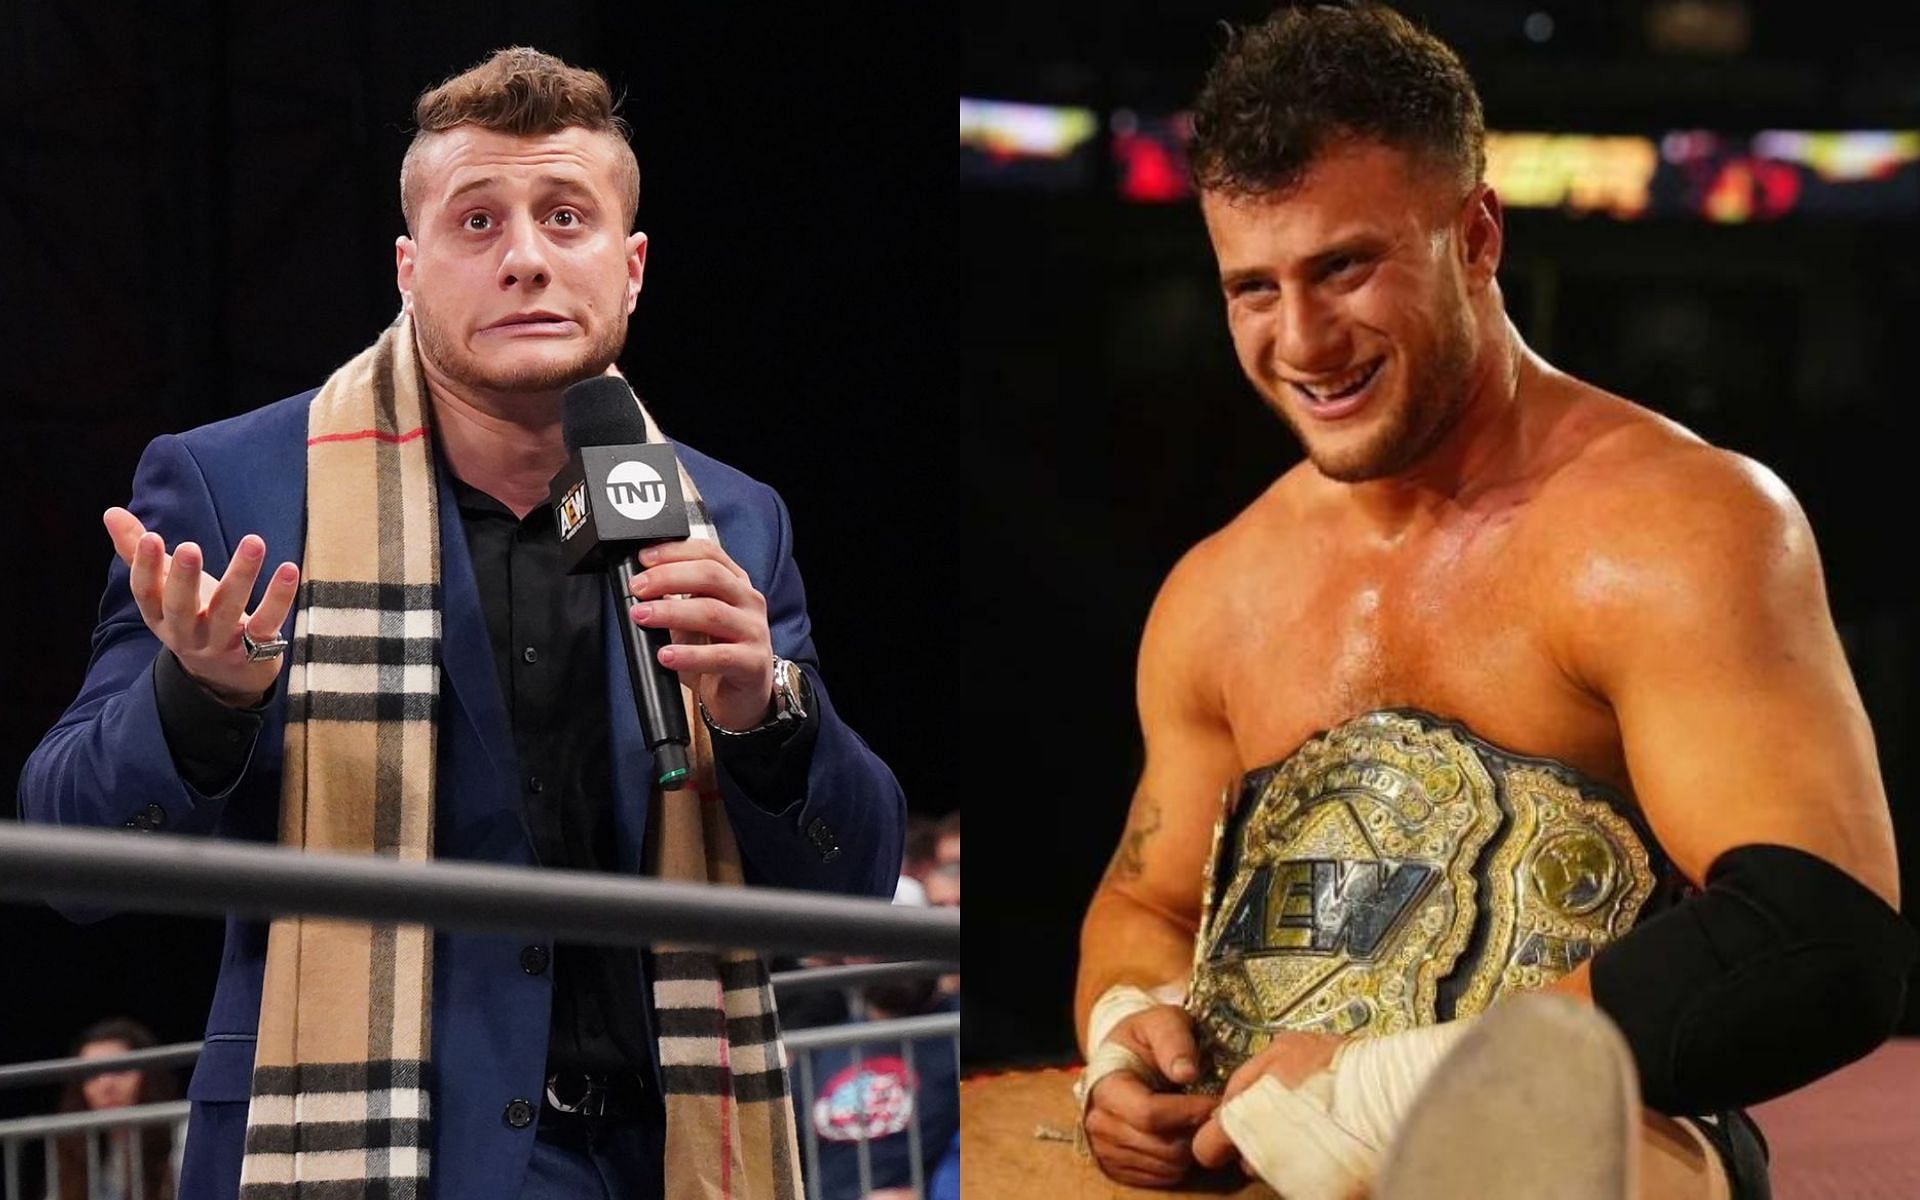 MJF is in his first reign as AEW World Champion